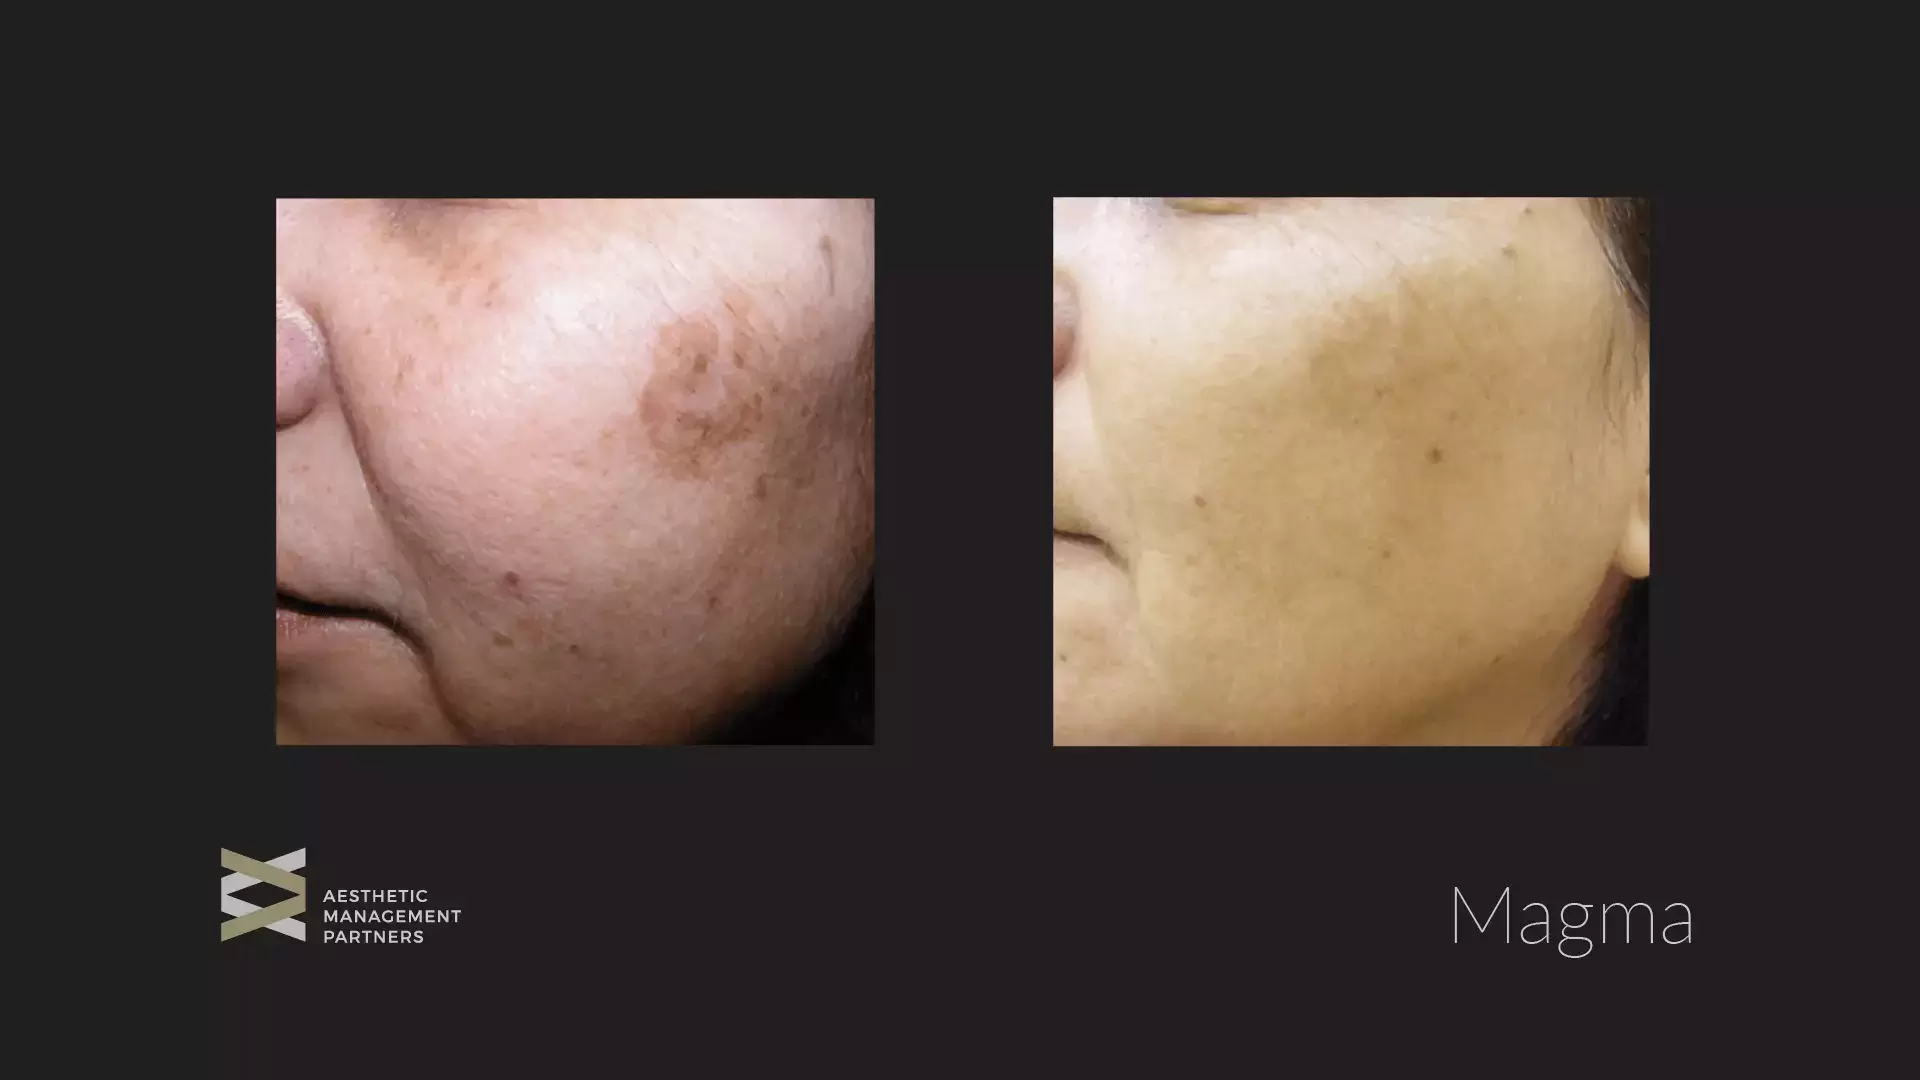 Magma Face Pigmentation - Aesthetic Management Partners - Medical Aesthetics Equipment For The Modern Practice